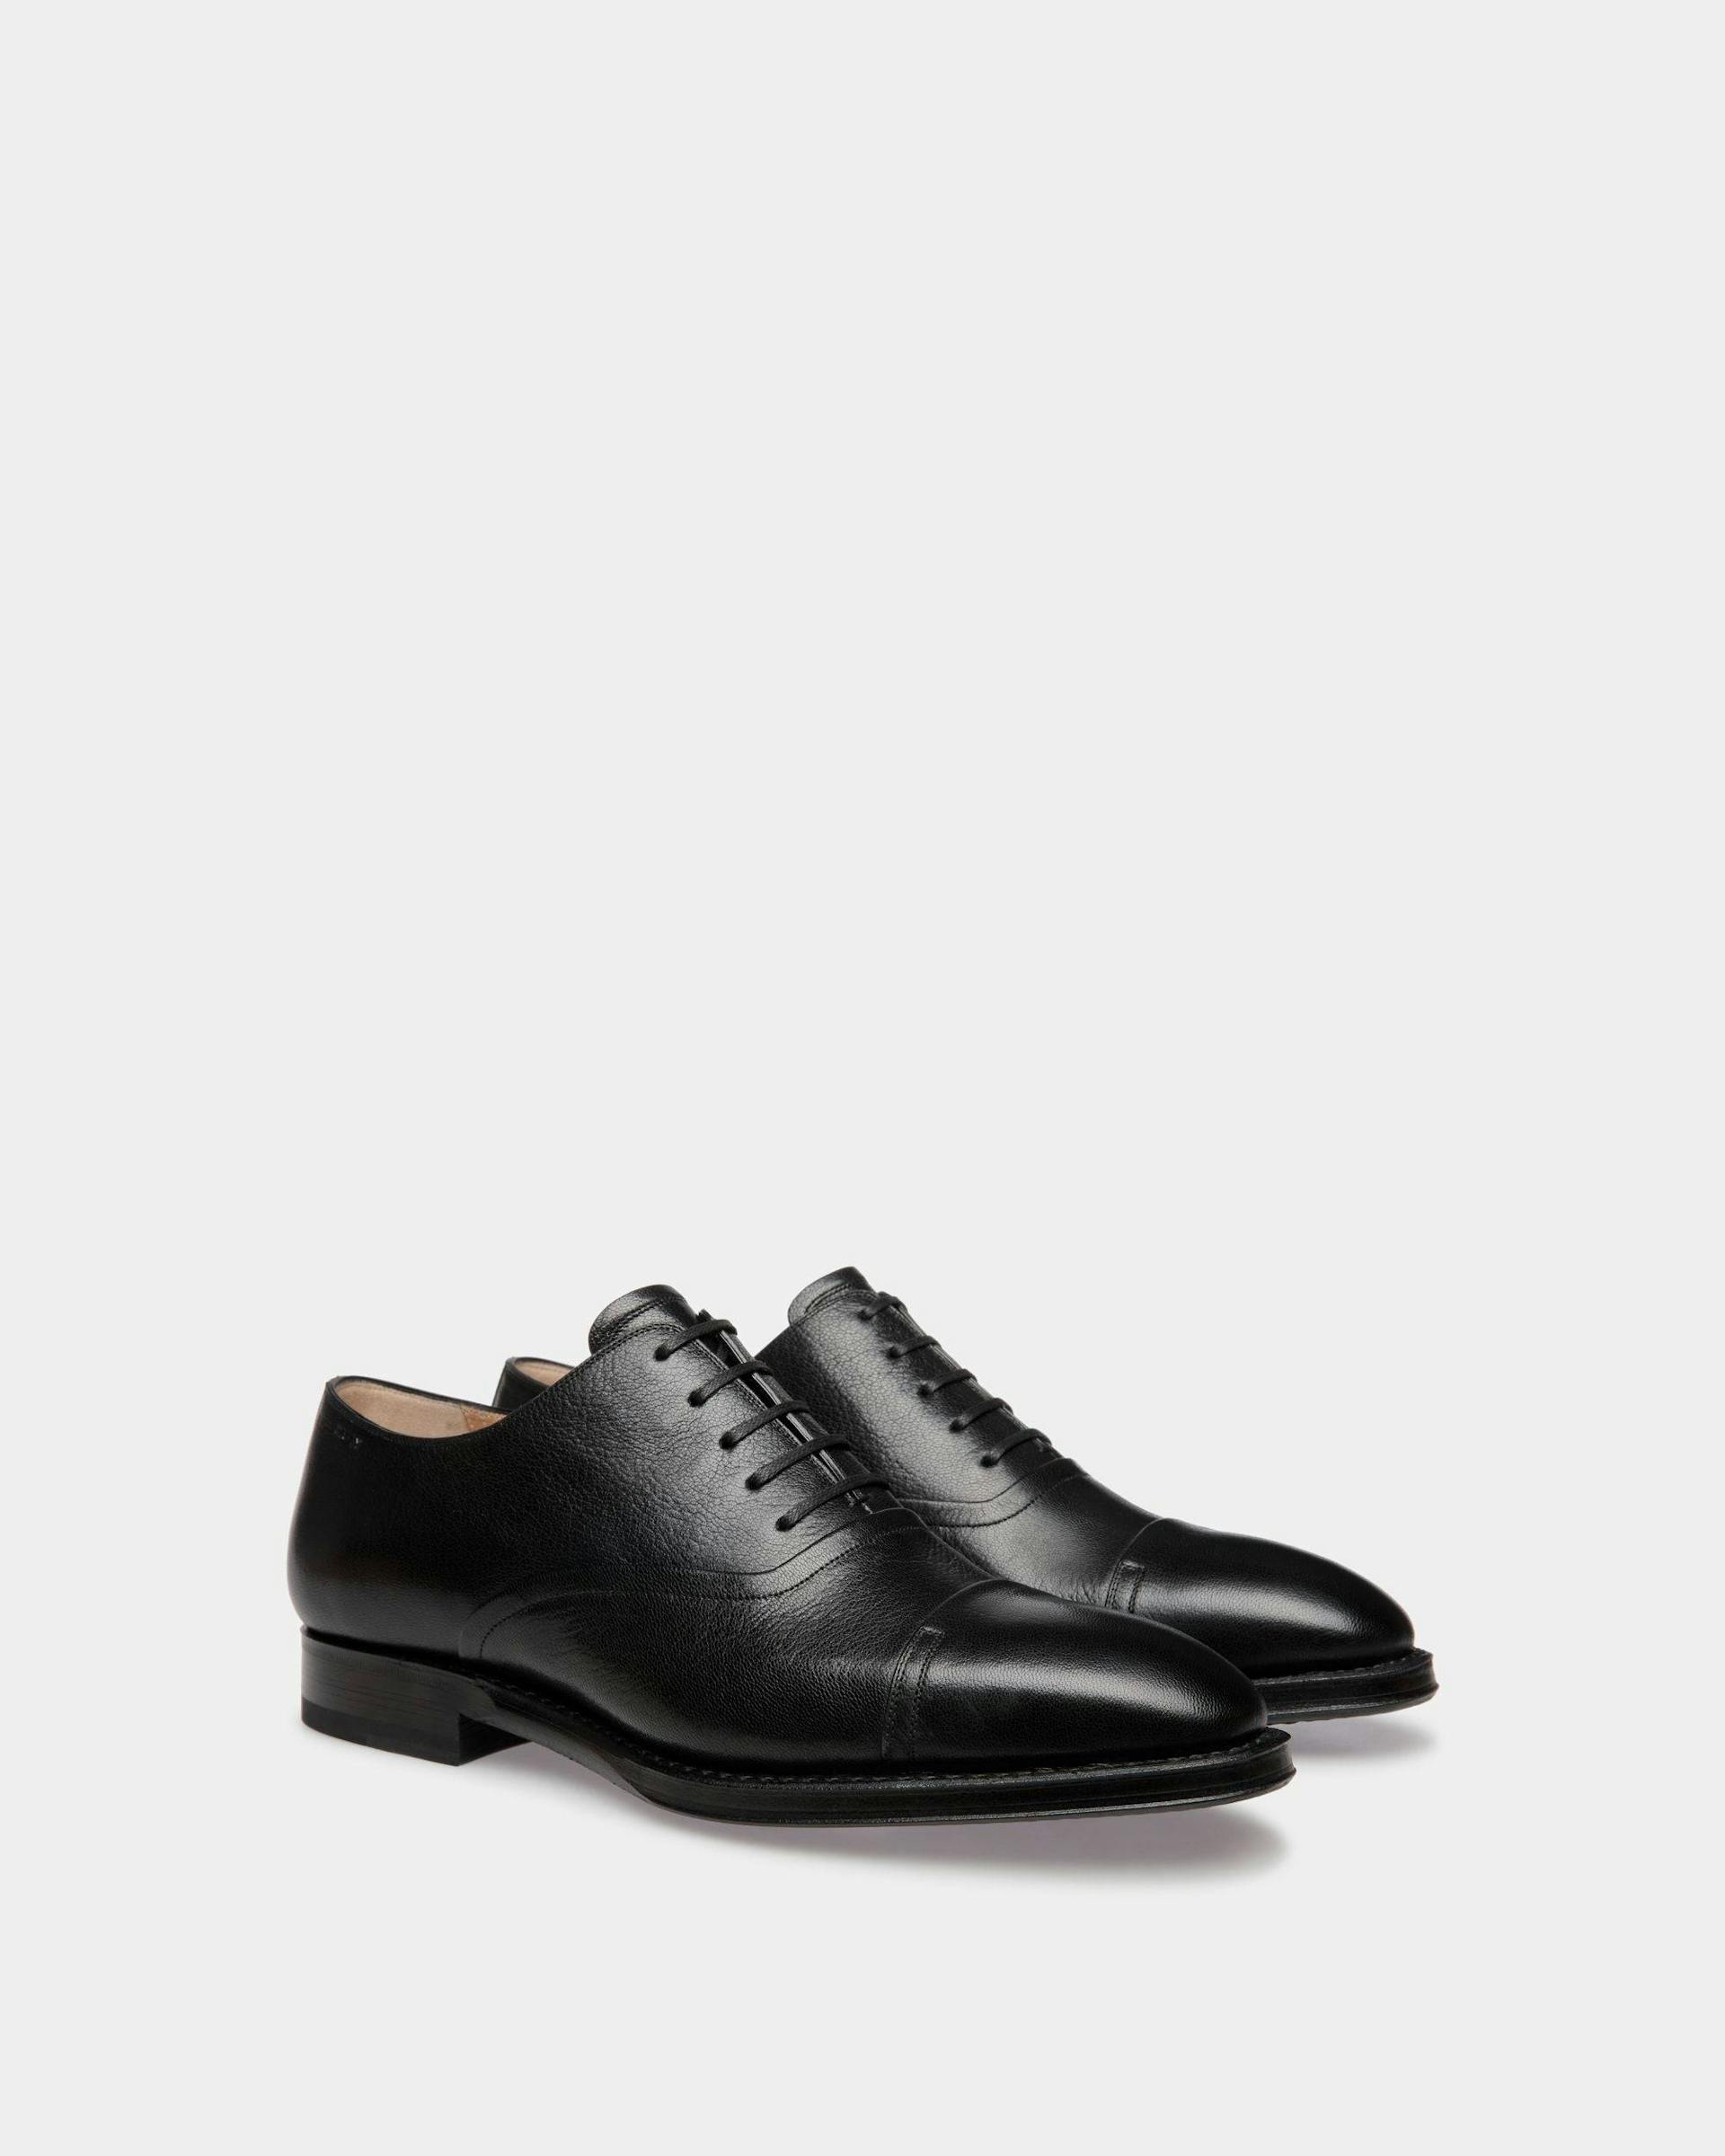 Men's Scribe Oxford in Black Grained Leather | Bally | Still Life 3/4 Front